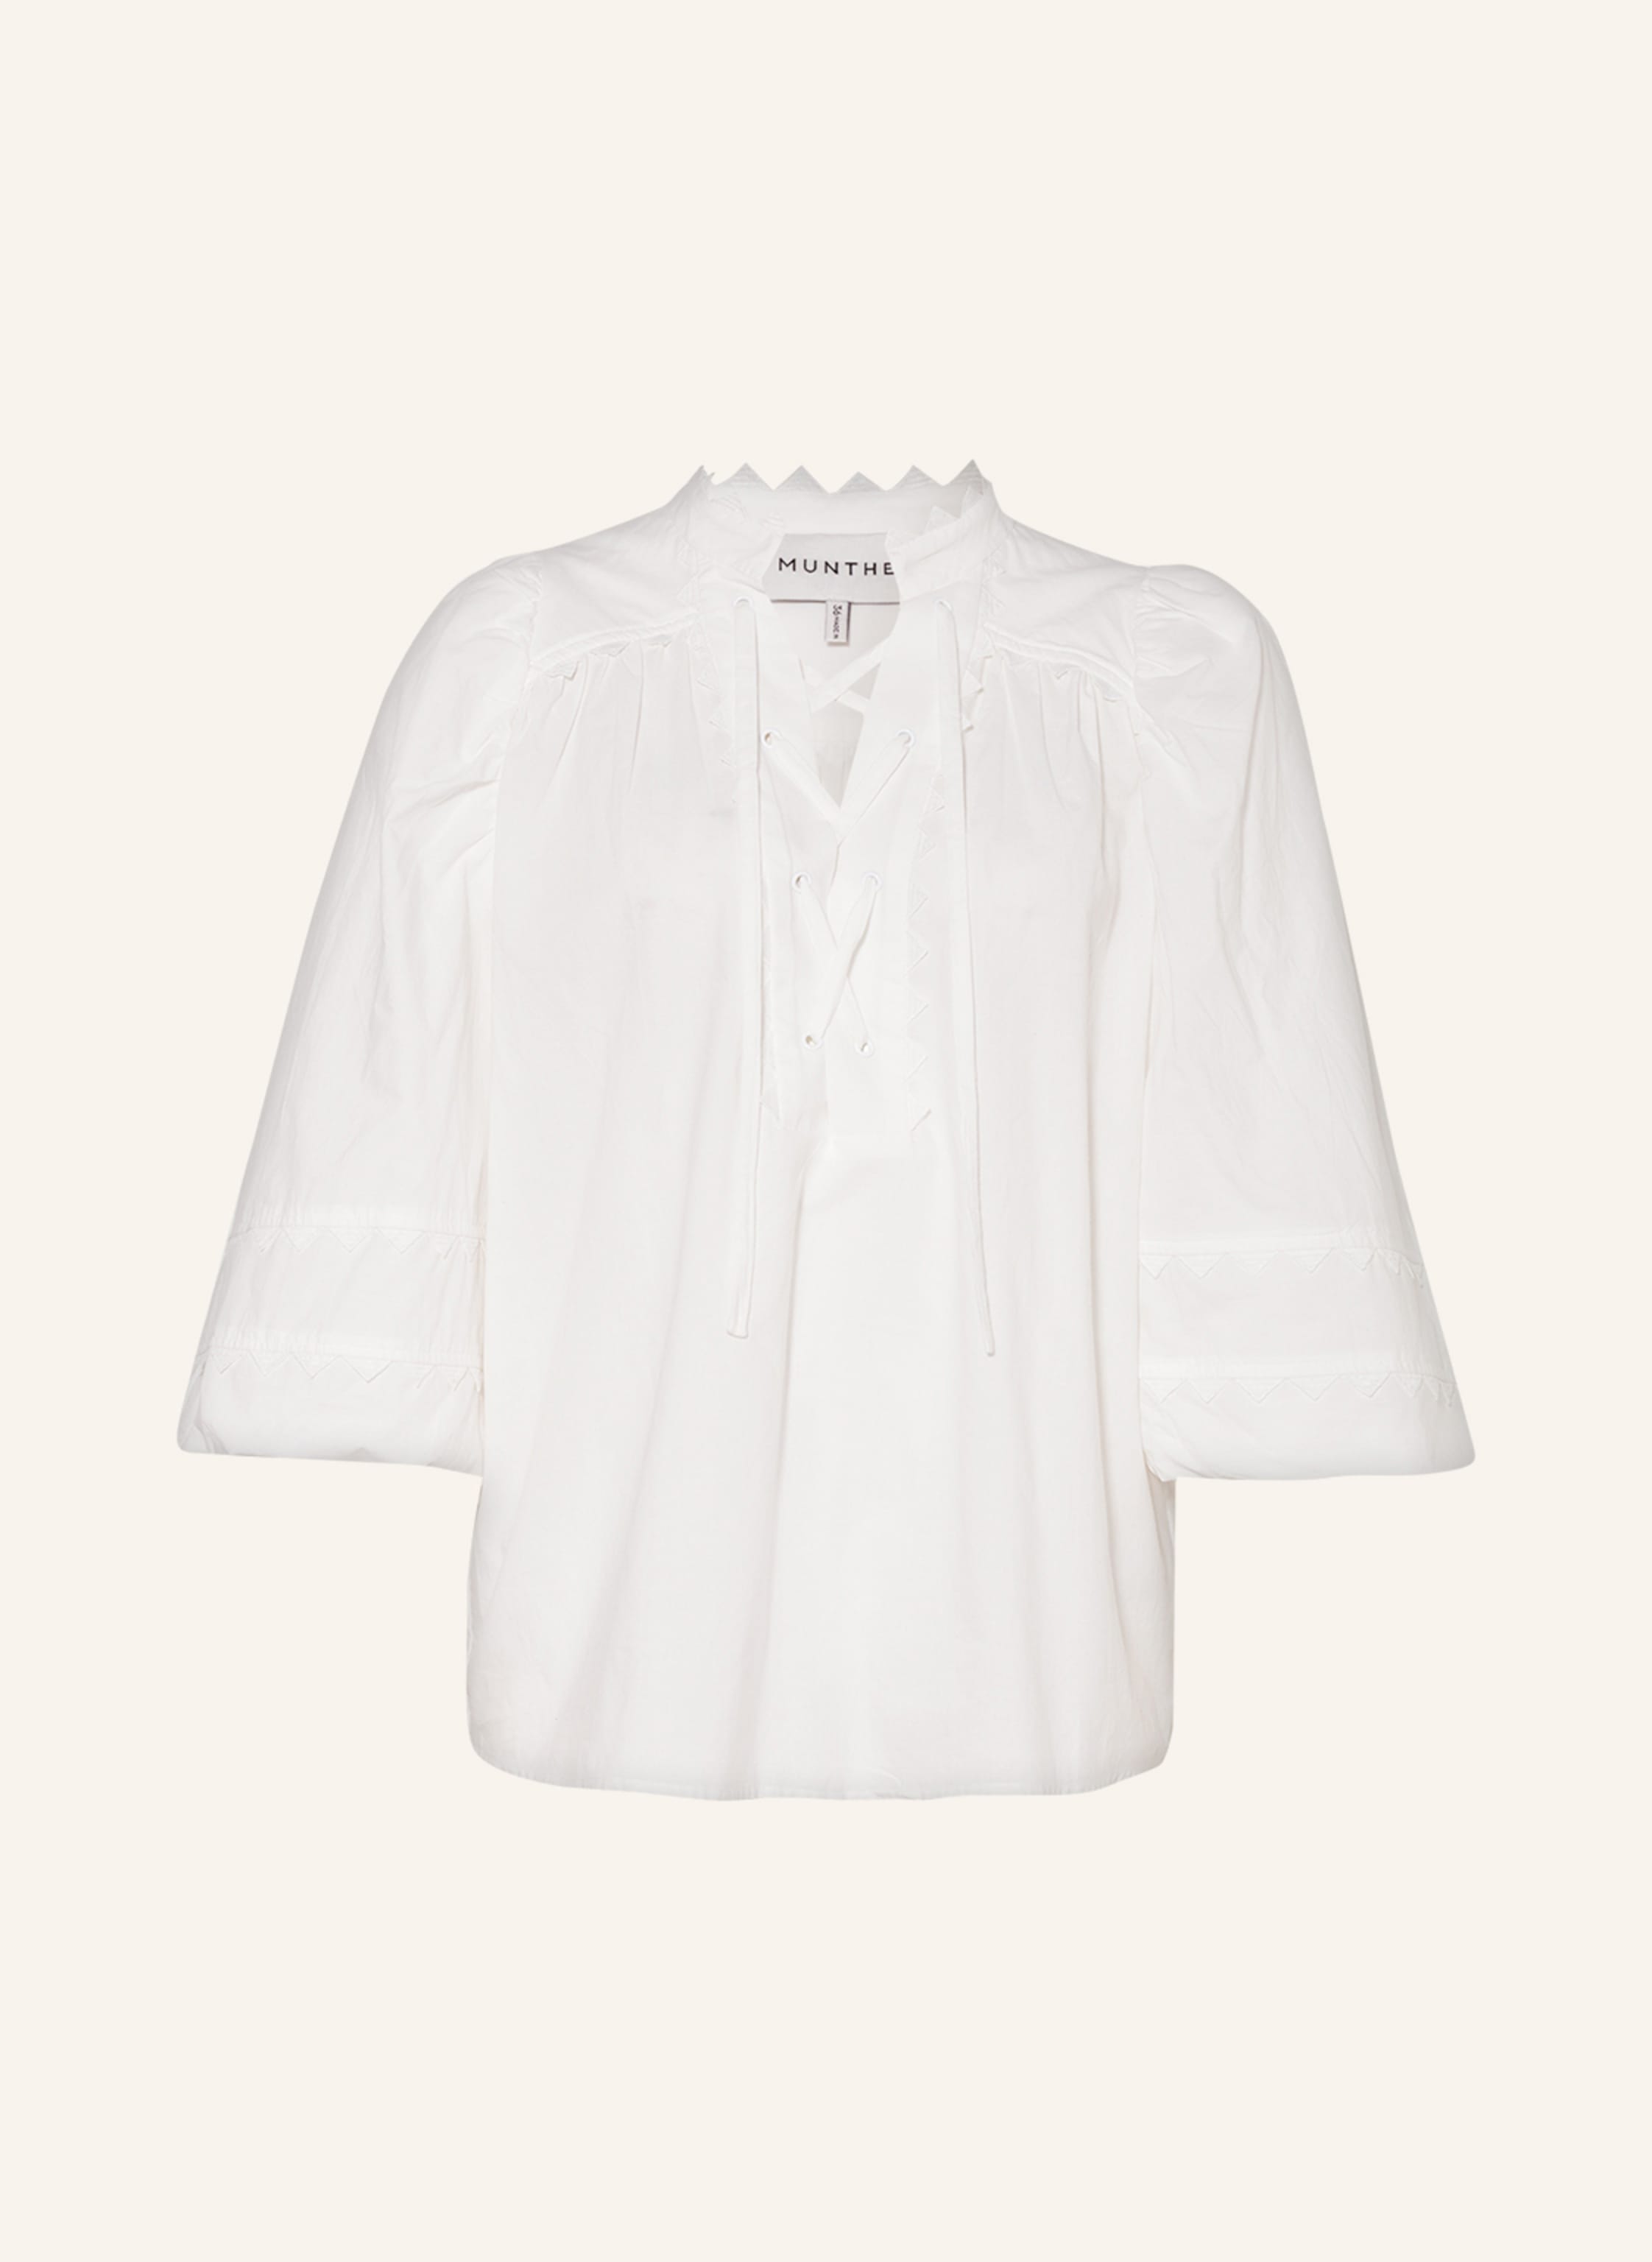 MUNTHE Blouse-style shirt HELIX with lace and 3/4 sleeves in white